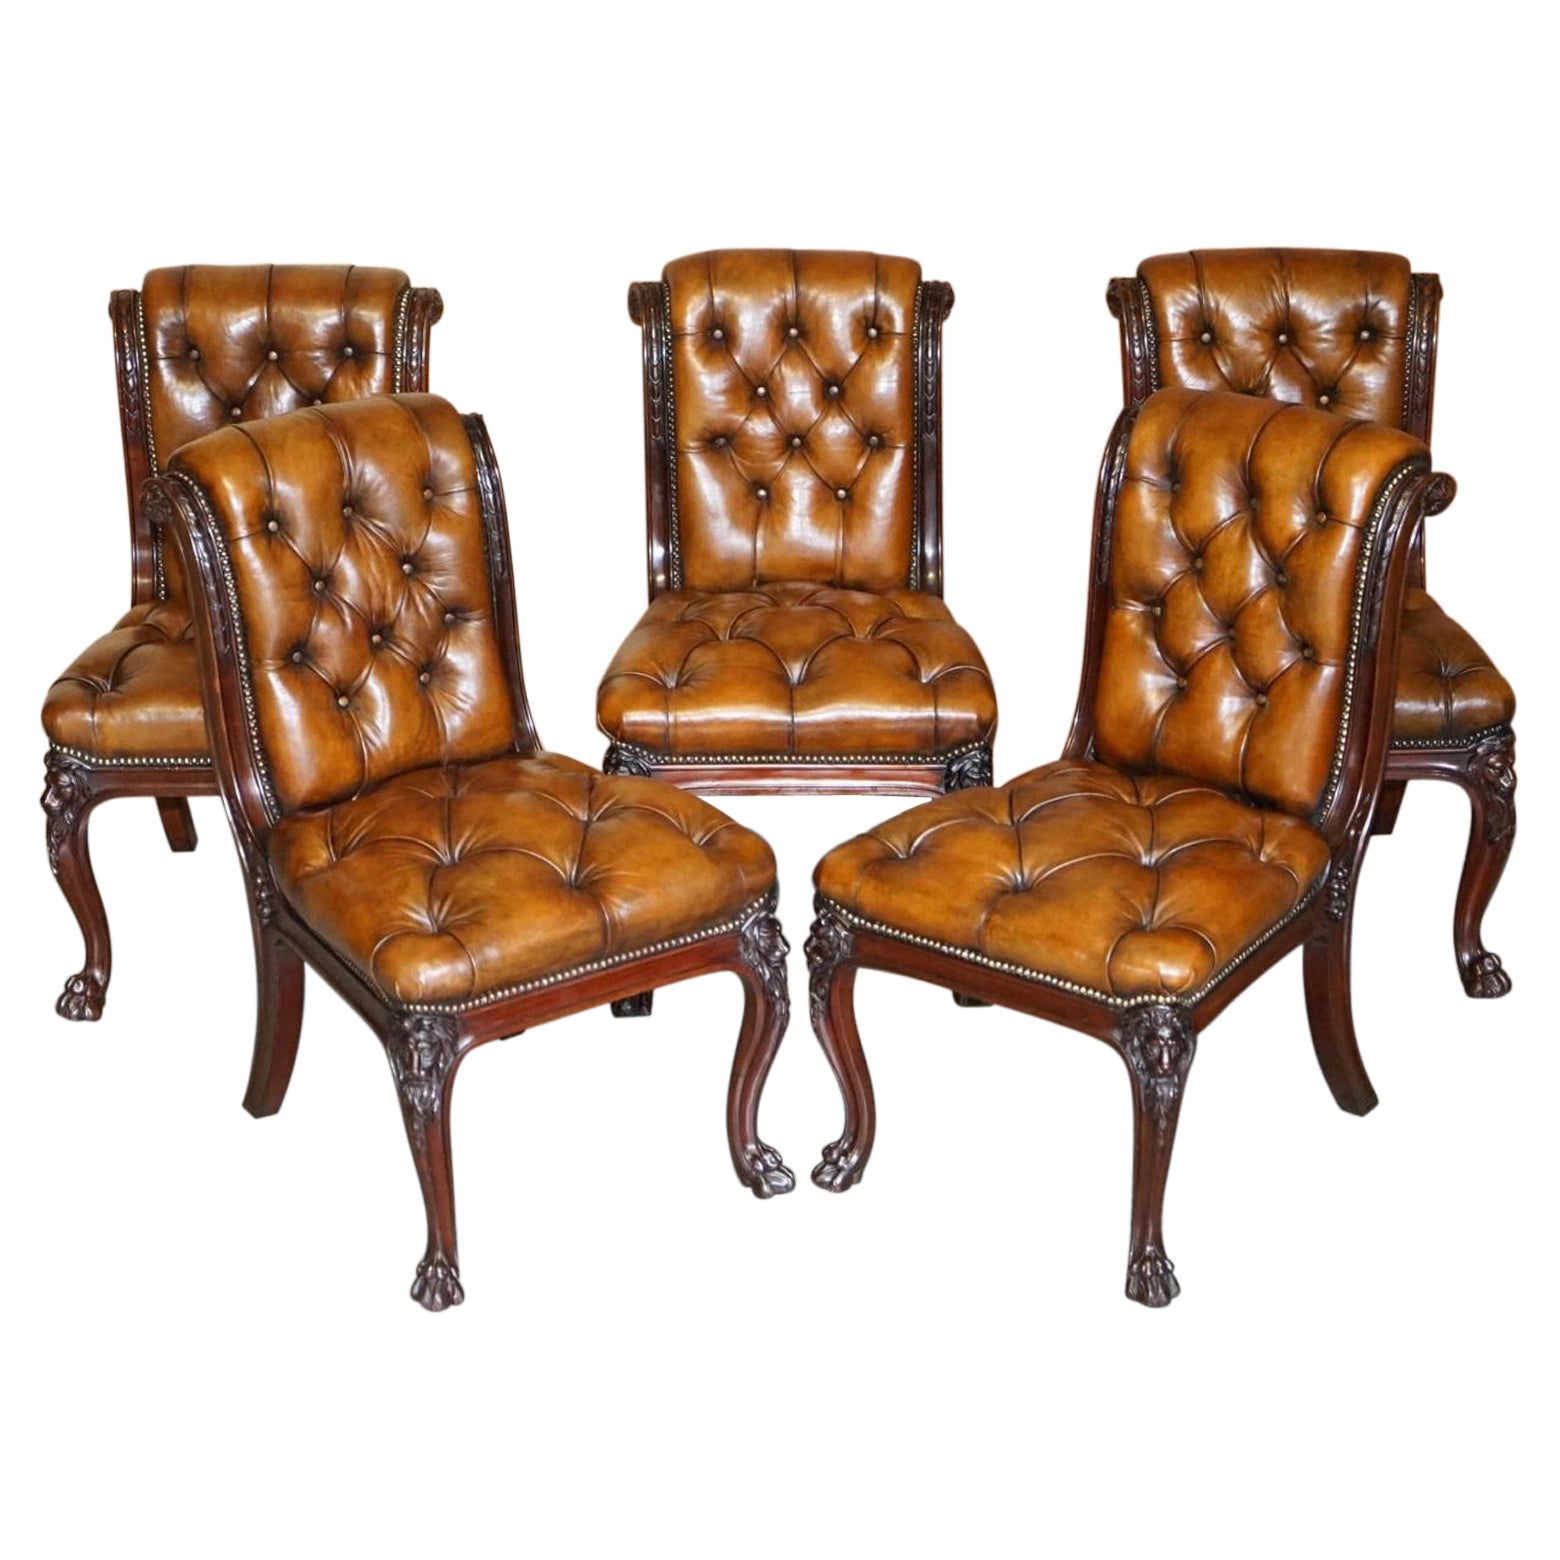 circa 1845 C Hindley & Sons Lion Carved Chesterfield Brown Leather Dining Chairs For Sale